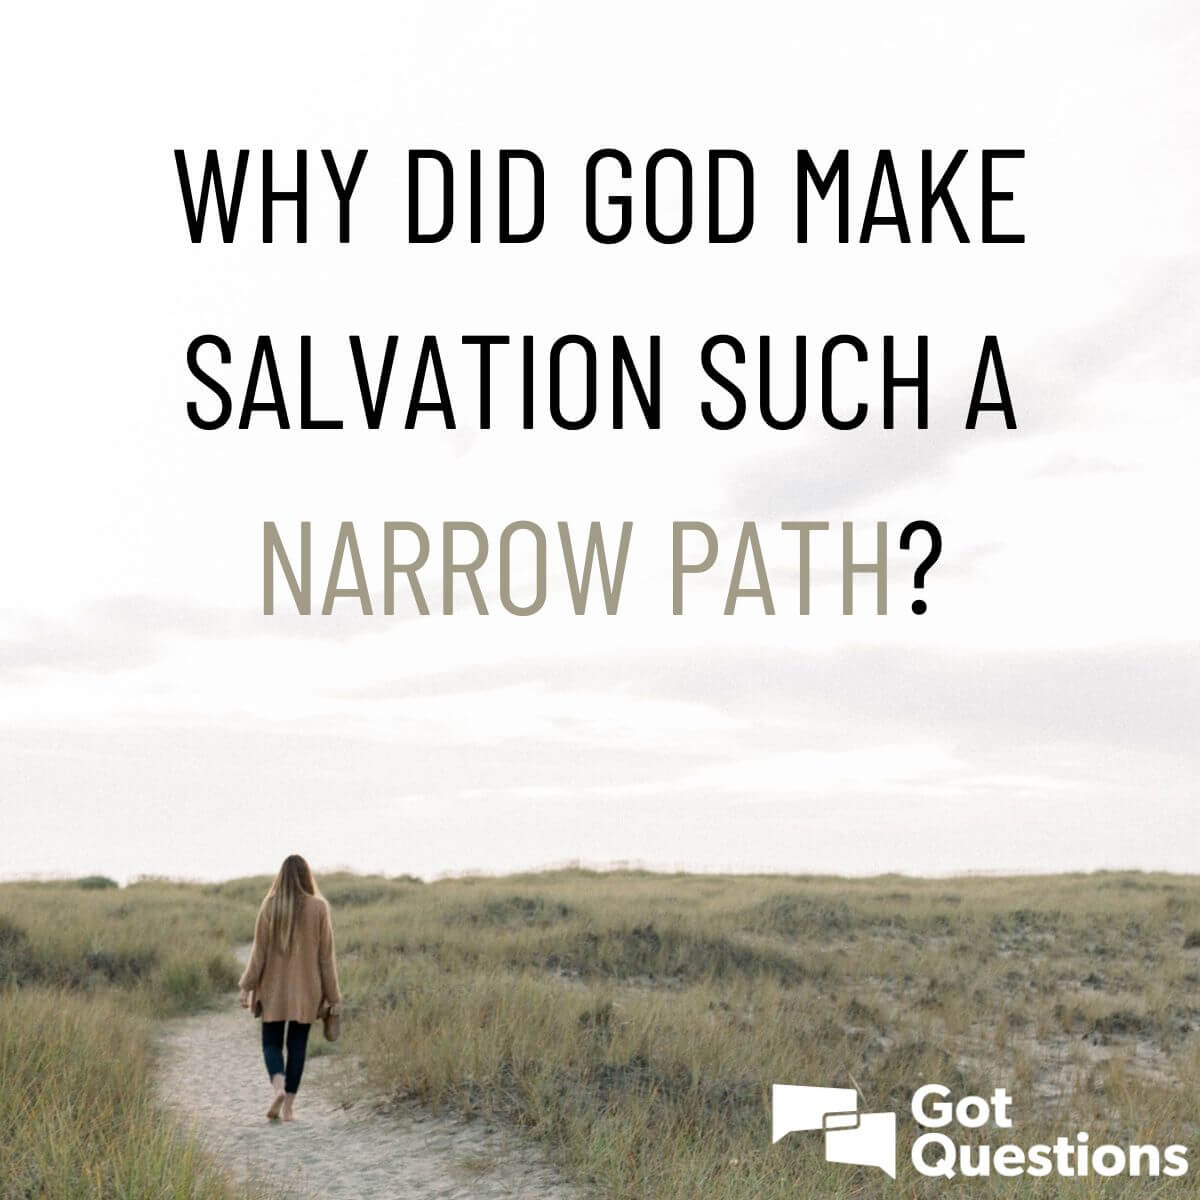 Why did God make salvation such a narrow path?